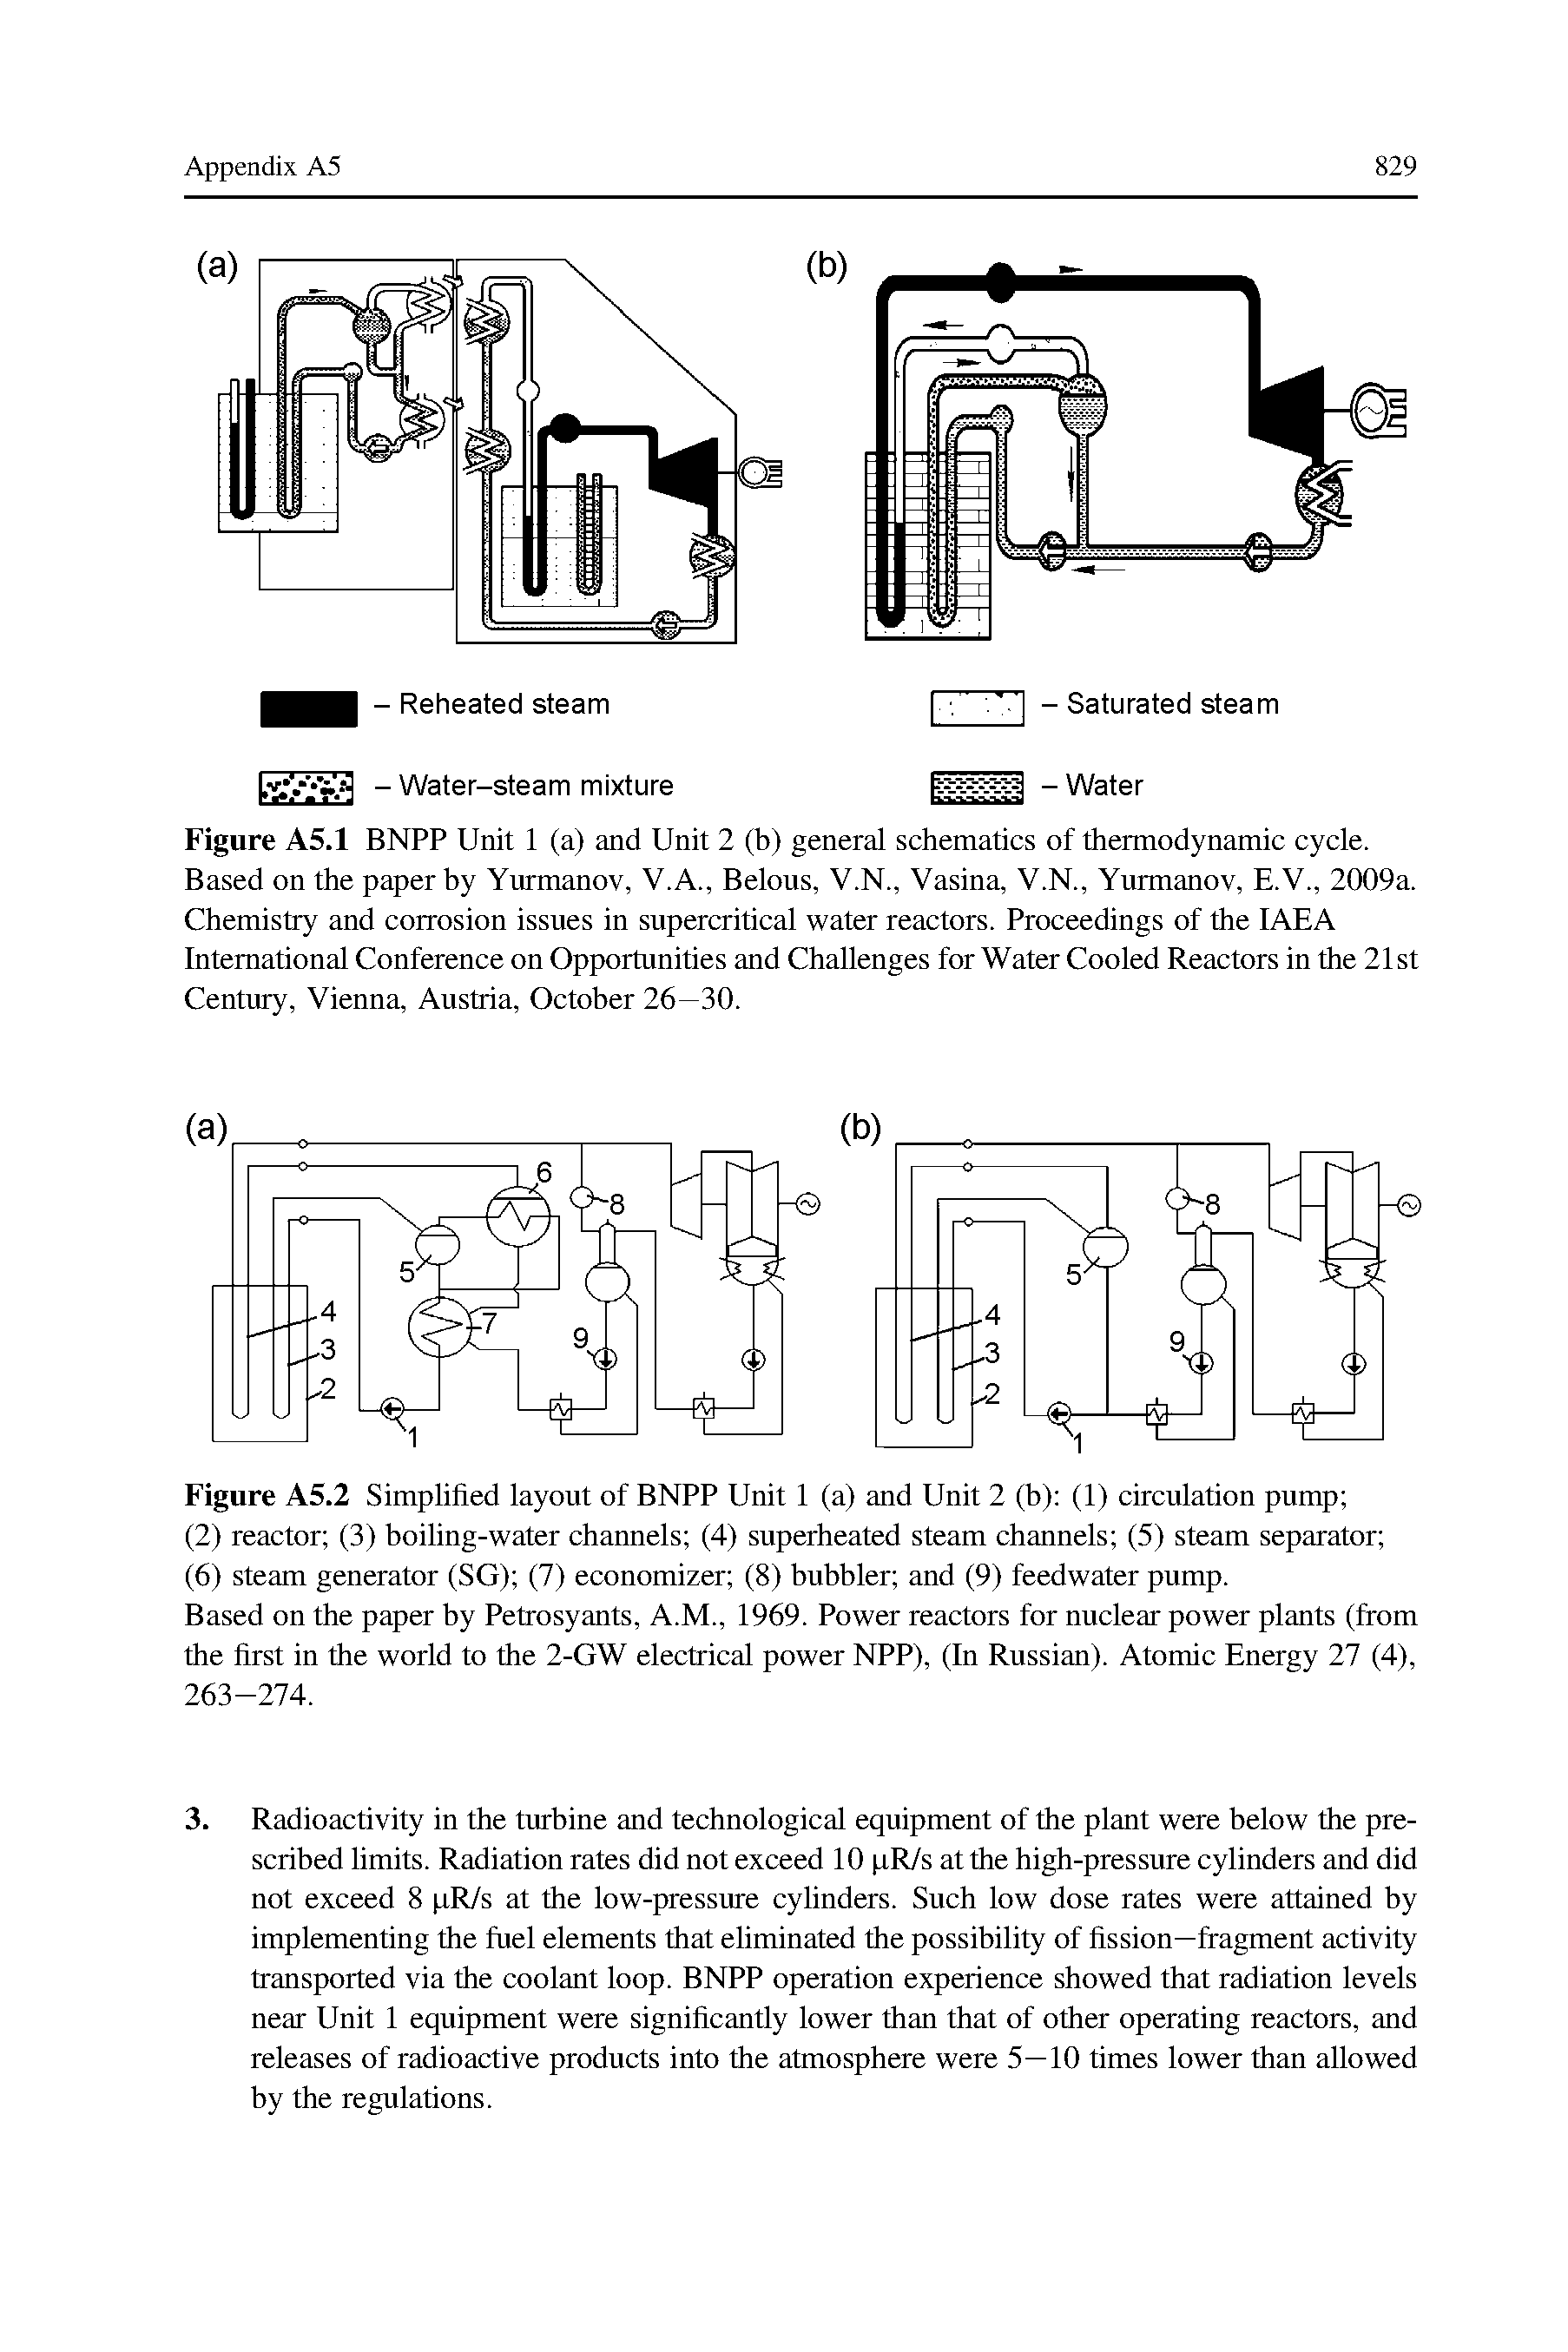 Figure A5.1 BNPP Unit 1 (a) and Unit 2 (b) general schematics of thermodynamic cycle. Based on the paper by Yurmanov, V.A., Belous, V.N., Vasina, V.N., Yurmanov, E.V., 2009a. Chemistry and corrosion issues in supercritical water reactors. Proceedings of the IAEA International Conference on Opportunities and Challenges for Water Cooled Reactors in the 21 st Century, Vienna, Austria, October 26—30.